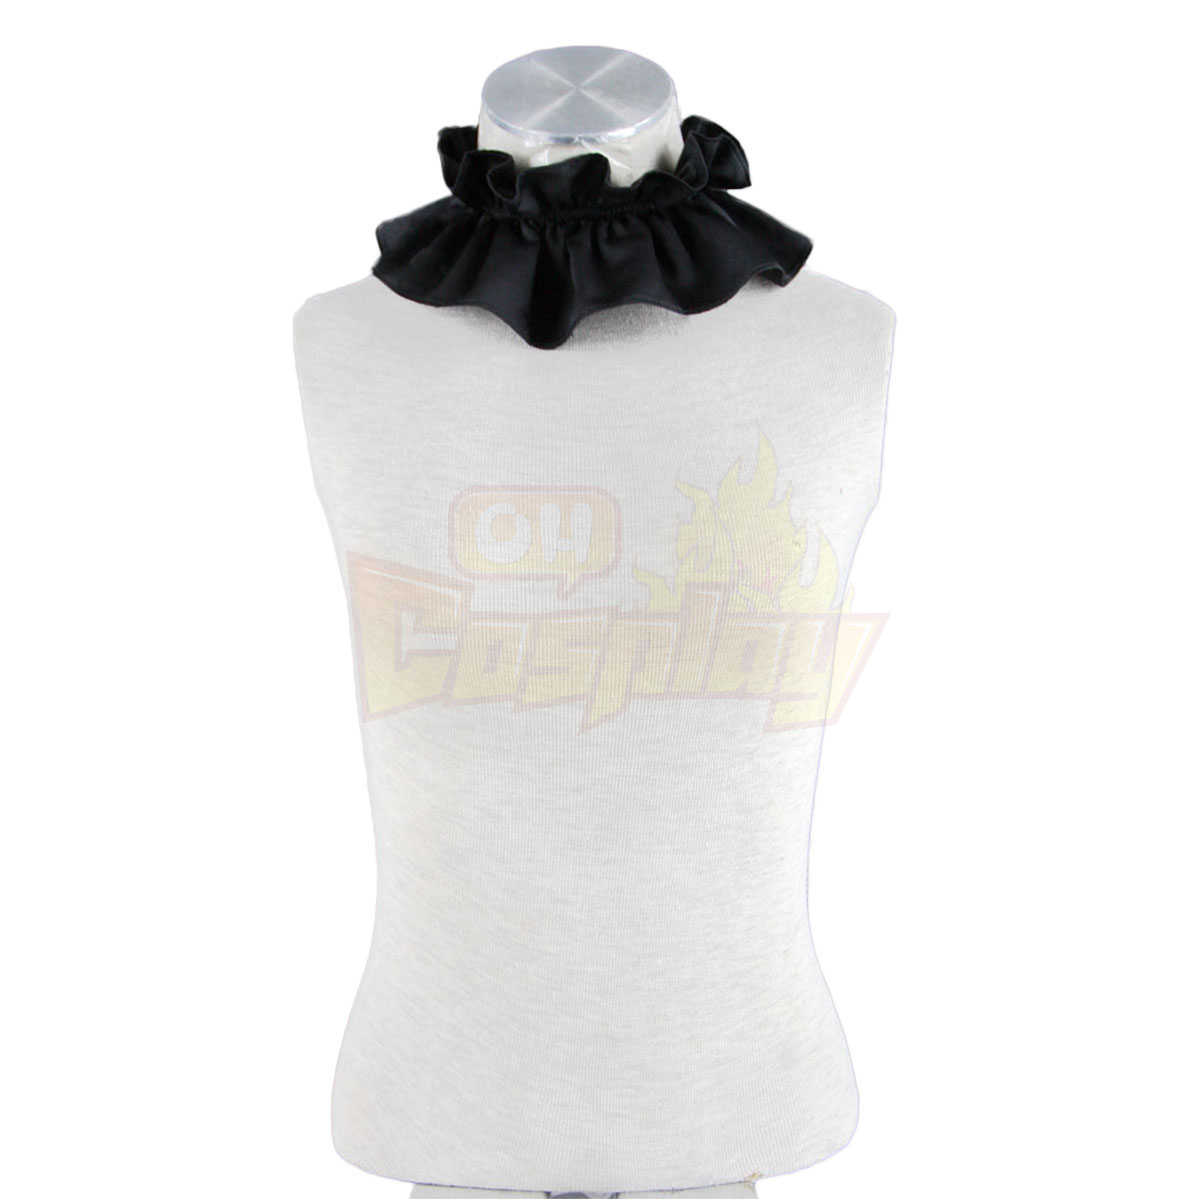 Deluxe Lolita Culture Neckerchief Bustle Middle Dresses Cosplay Costumes